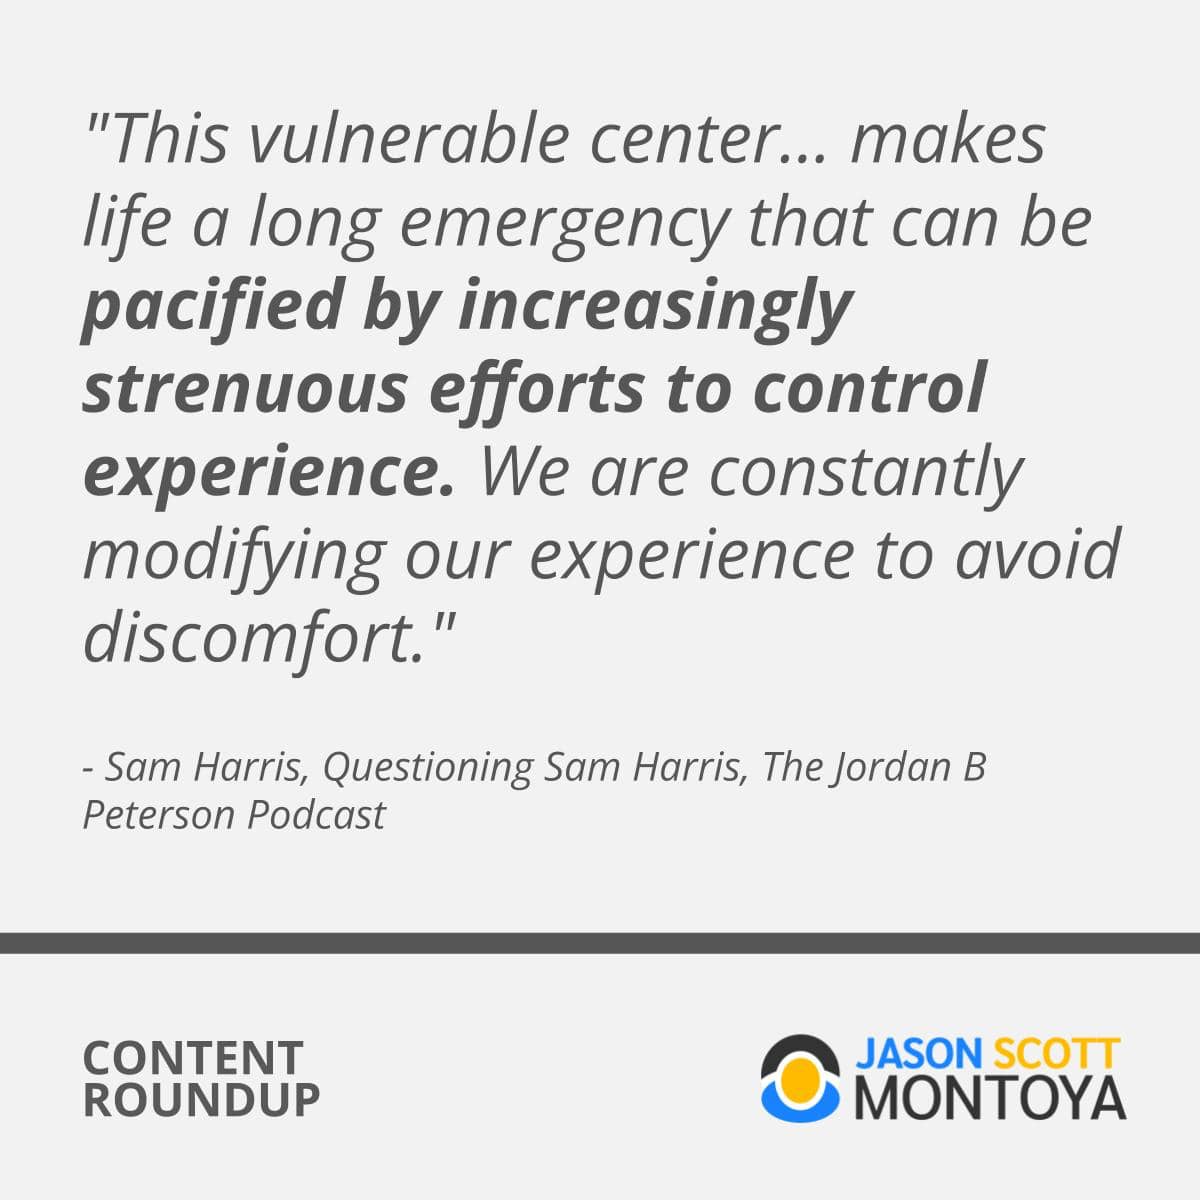 “This vulnerable center... makes life a long emergency that can be pacified by increasingly strenuous efforts to control experience. We are constantly modifying our experience to avoid discomfort.